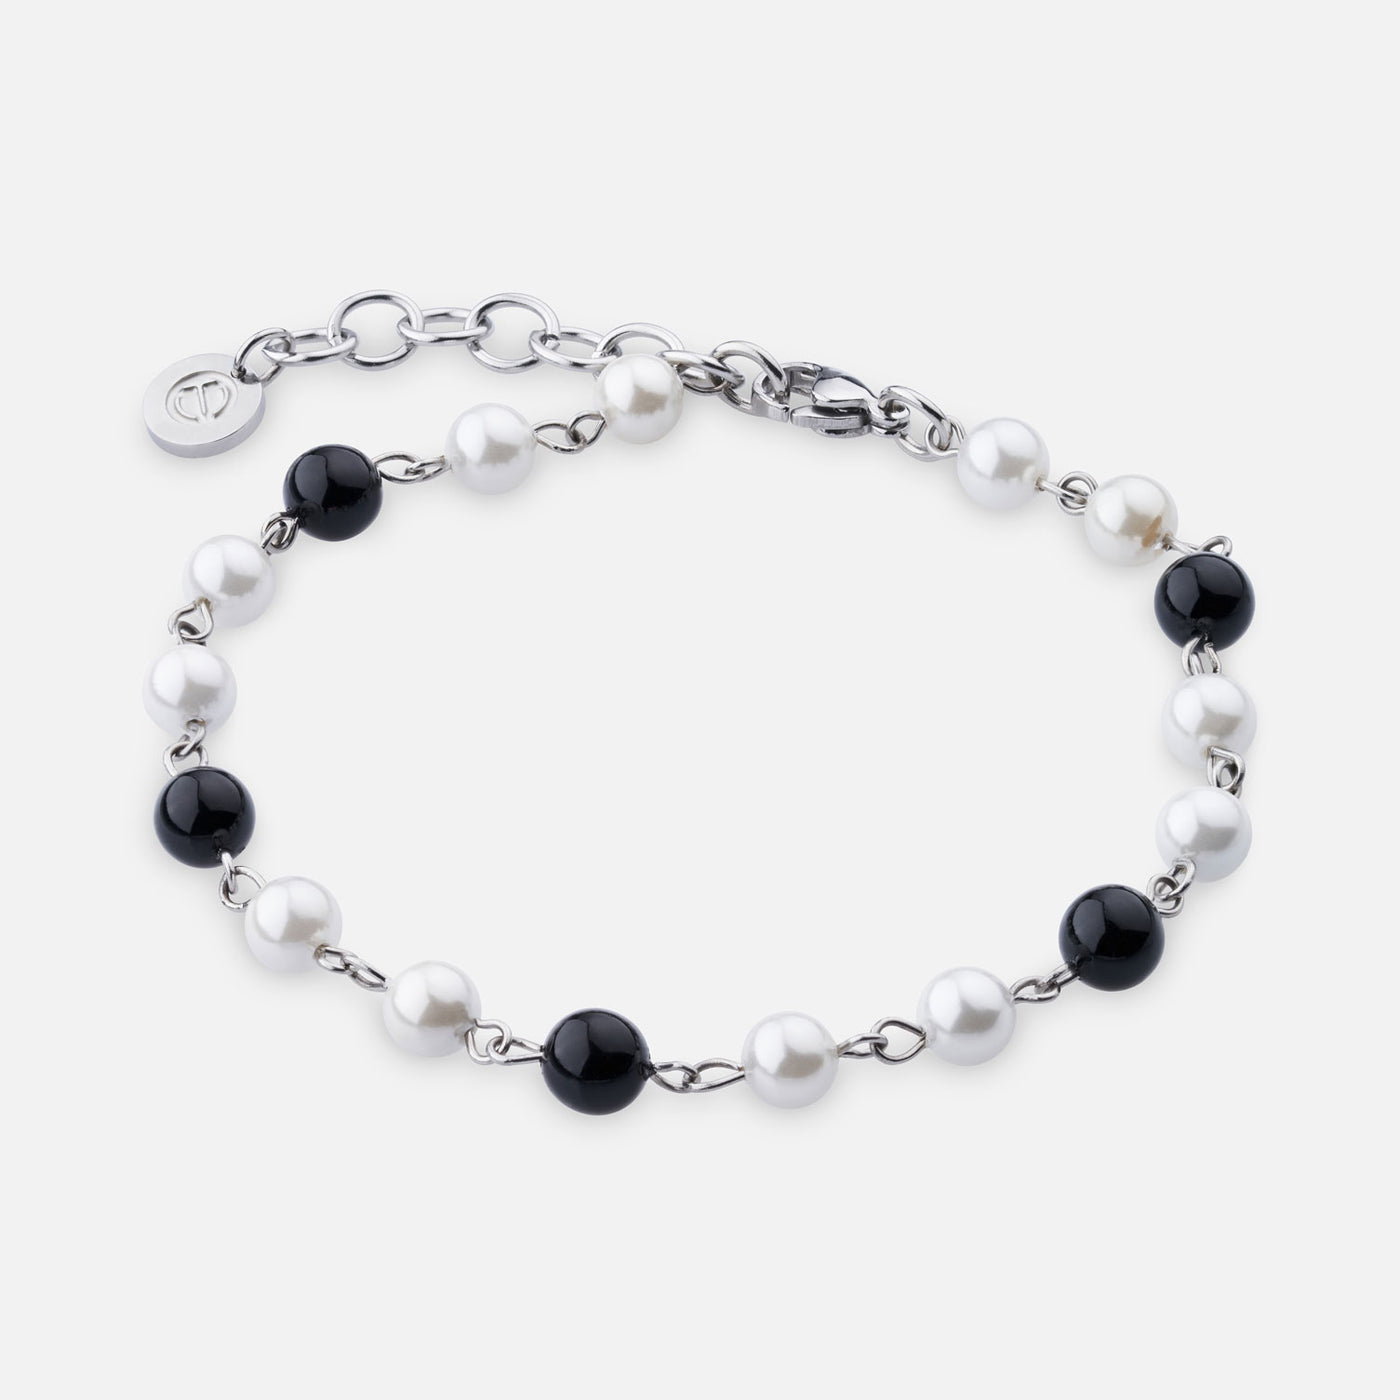 Chained Pearls Bracelet - Contrasting